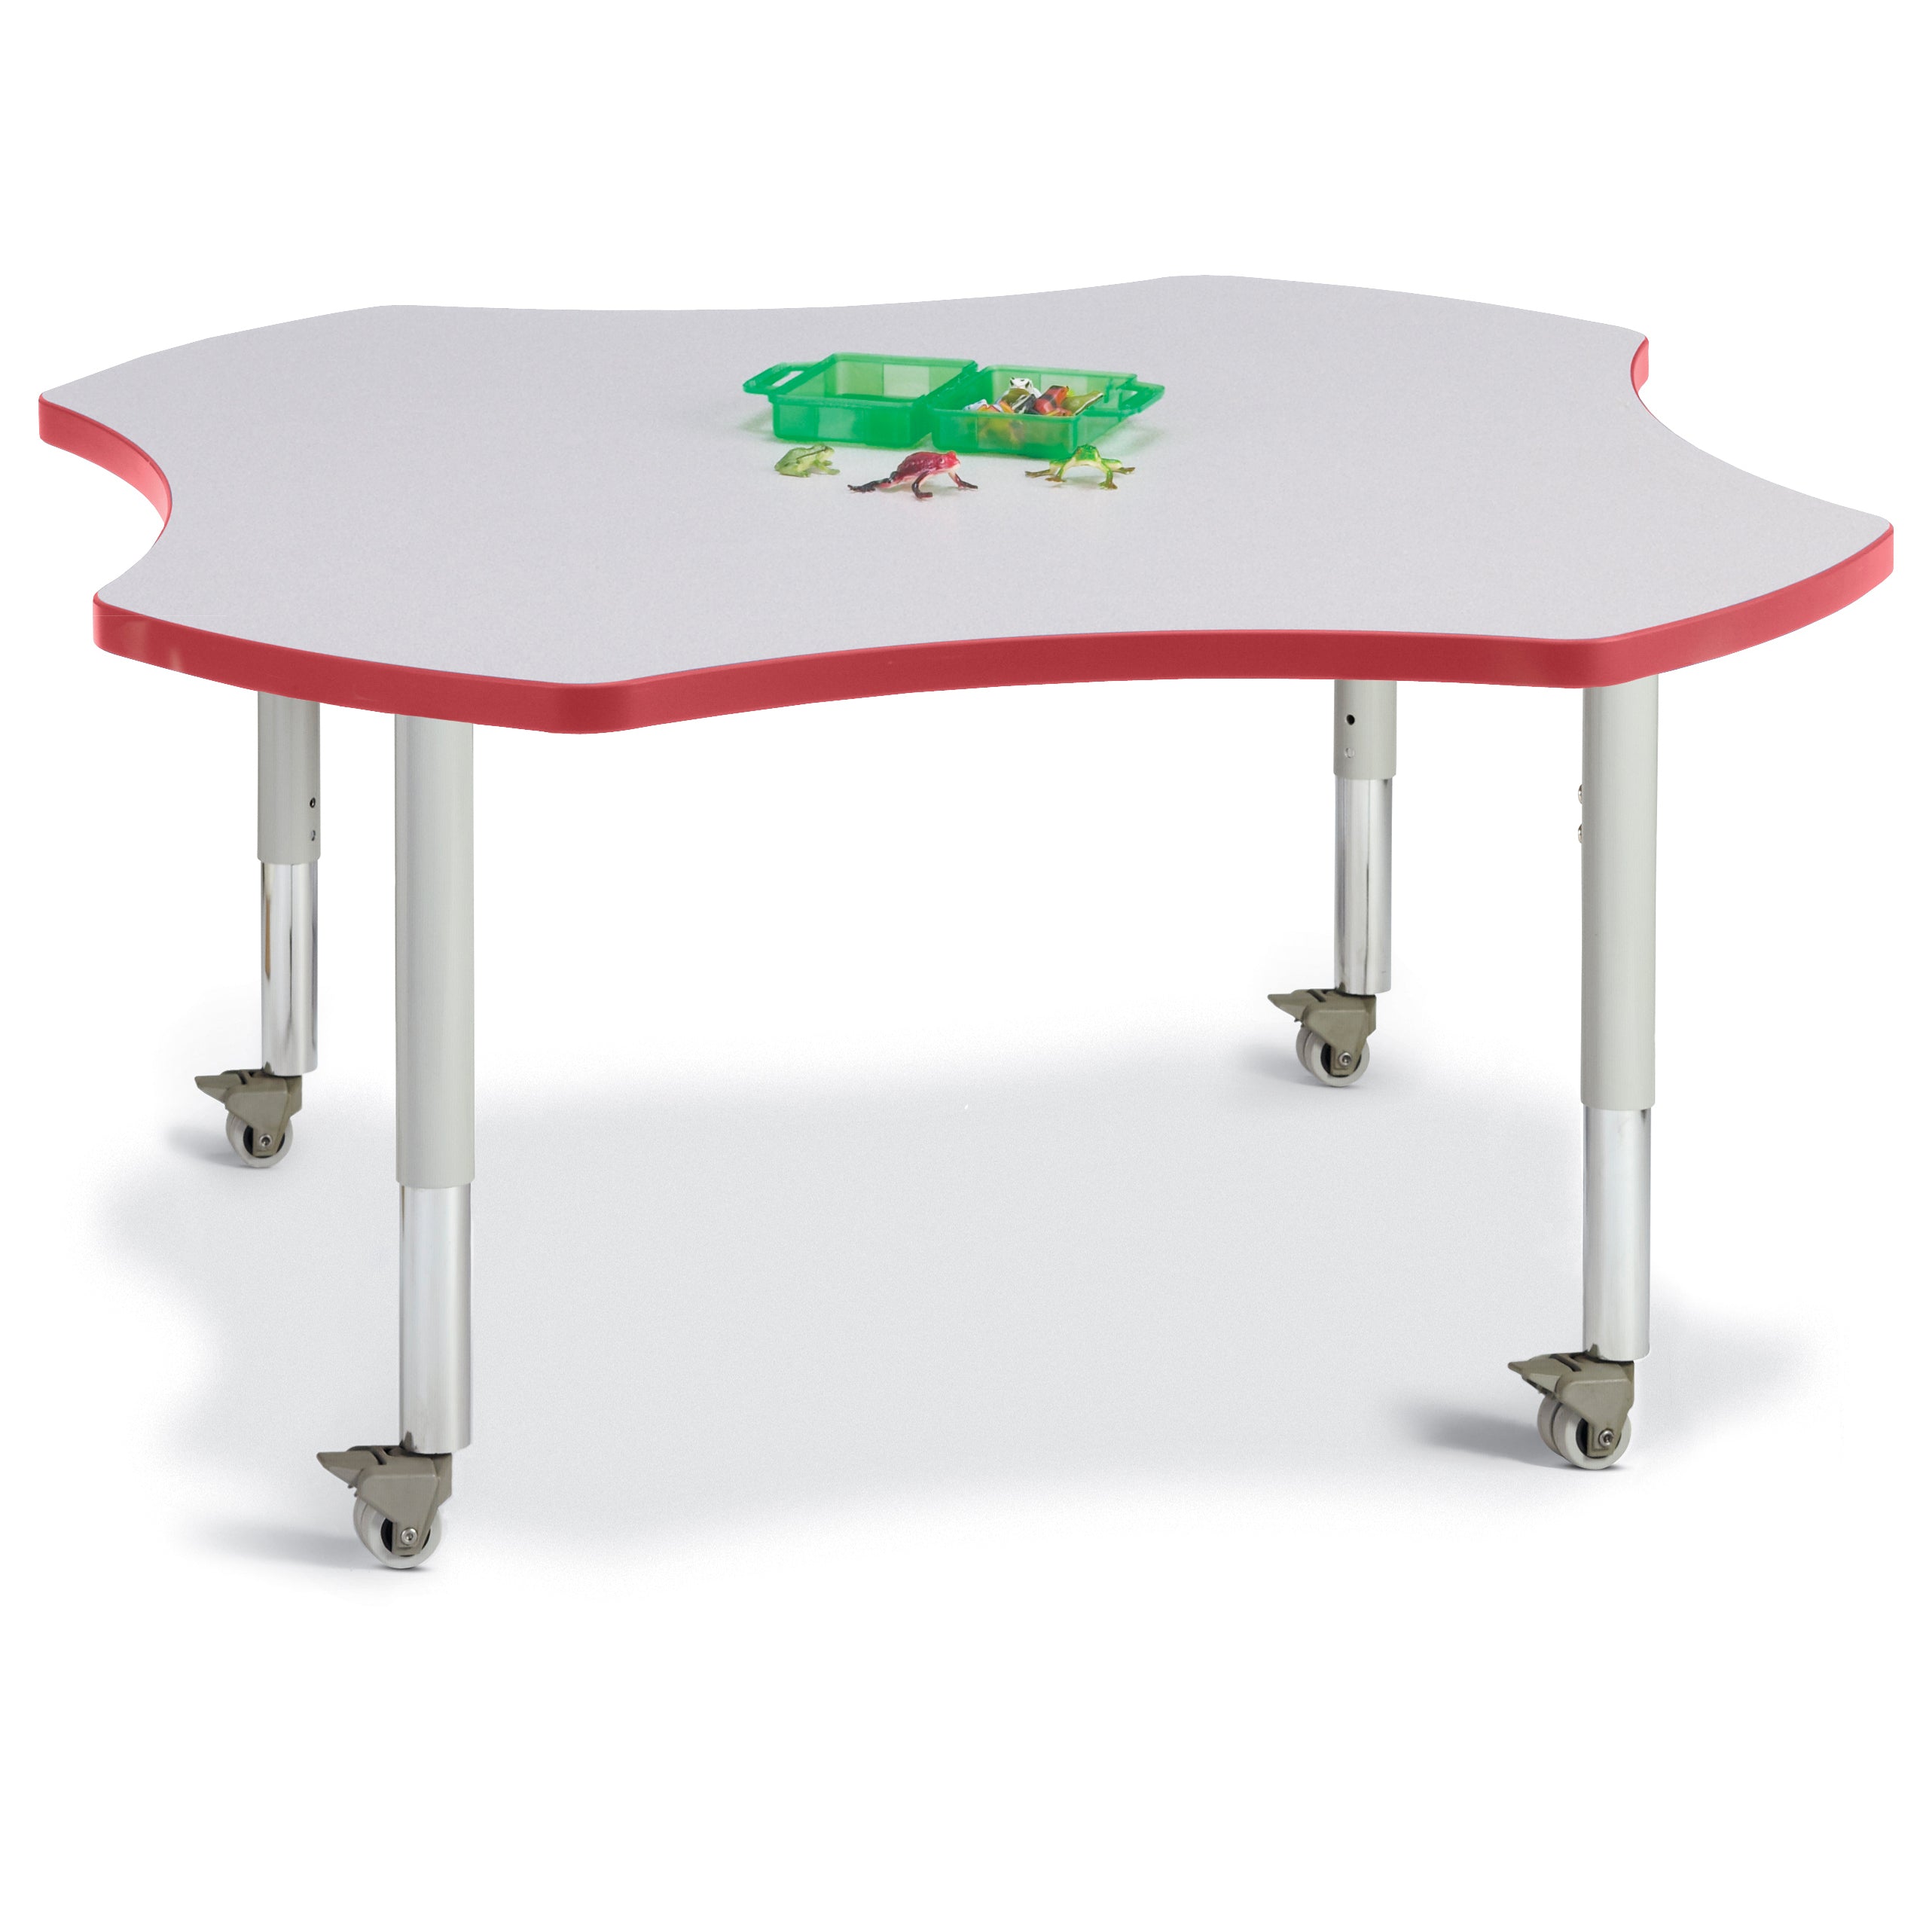 6453JCM008, Berries Four Leaf Activity Table, Mobile - Freckled Gray/Red/Gray